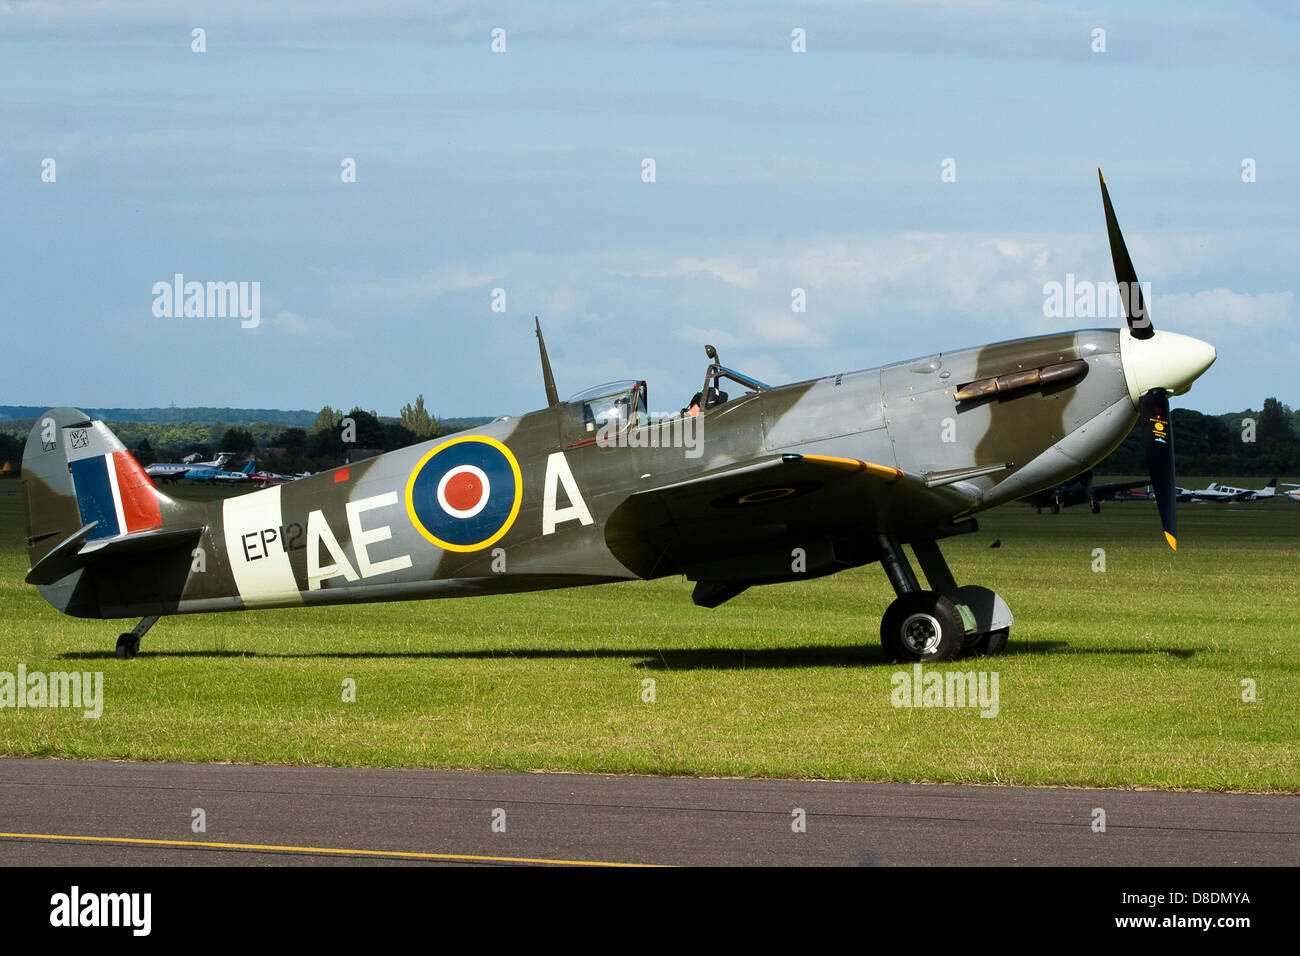 Vickers Supermarine Spitfire G-LFVB EP120 Royal Air Force Warbird Fighter at Duxford Flying Legends Airshow Stock Photo